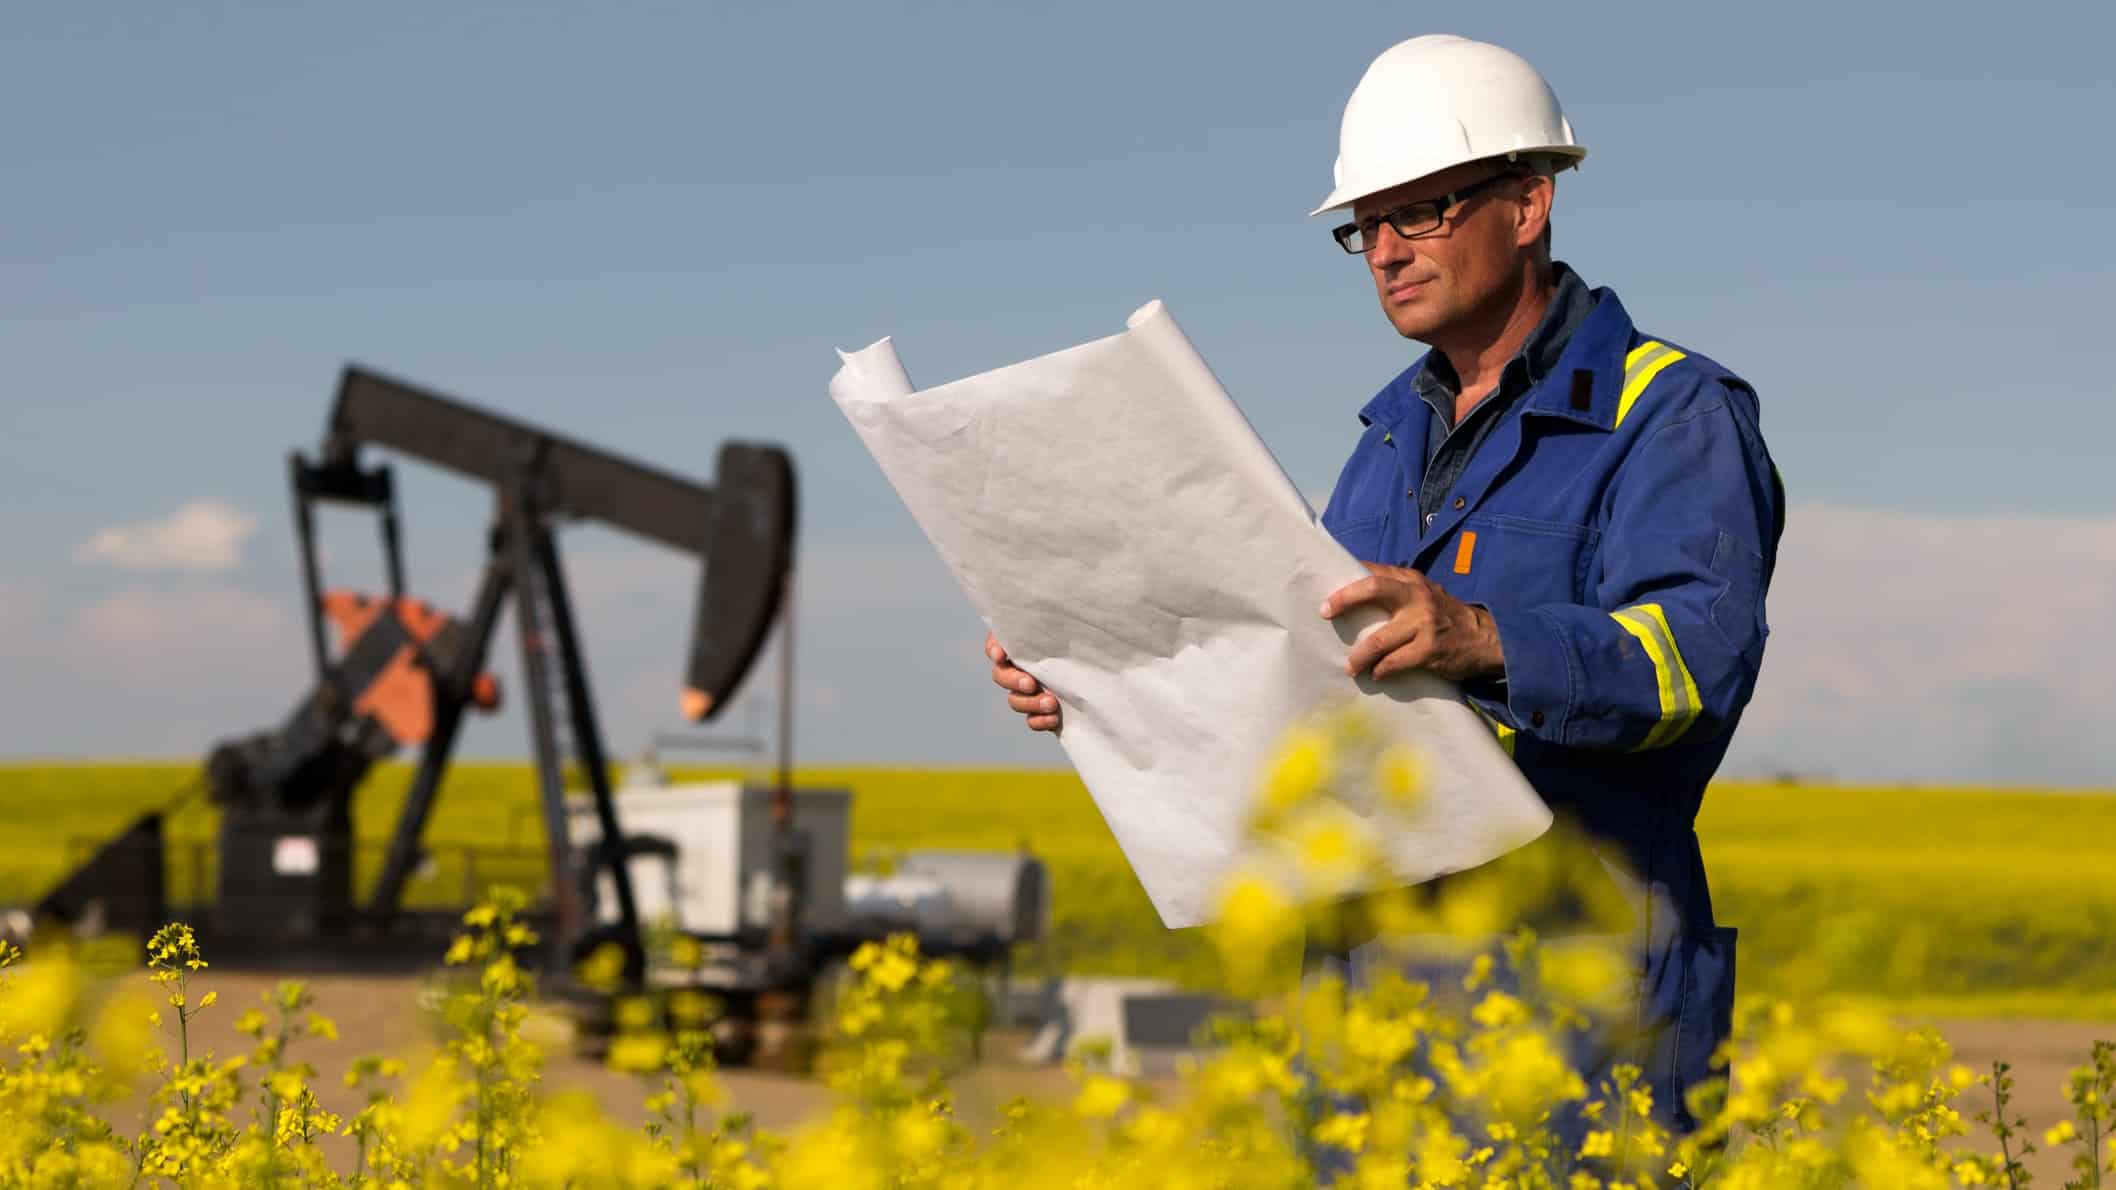 A Santos oil and gas worker wearing a hard hat stands in a yellow field looking at blueprints with an oil rig and blue sky in the background